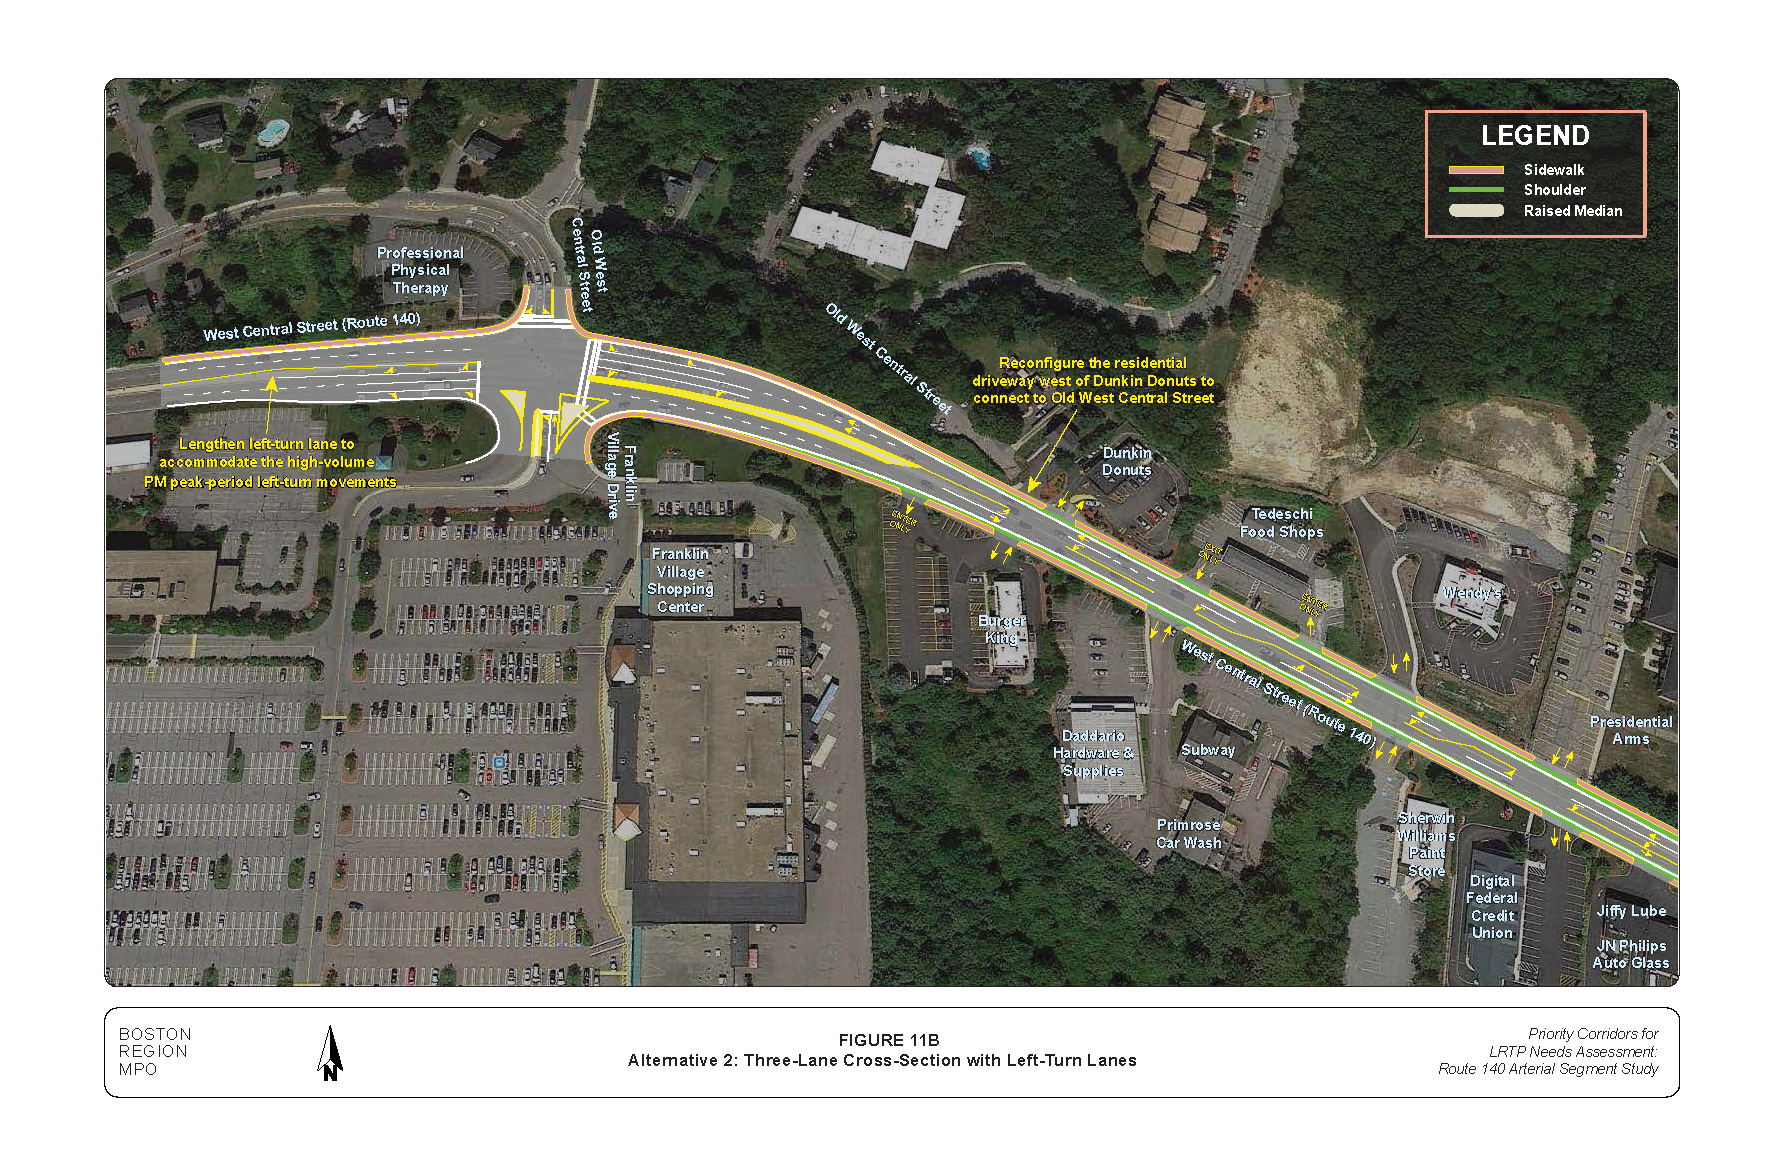 FIGURE 11B: Alternative 2: Three-Lane Cross-Section with Left-Turn Lanes. Aerial-view map that illustrates MPO staff “Improvement Alternative 2,” which recommends reconfiguring West Central Street into a three-lane cross-section with left-turn lanes.